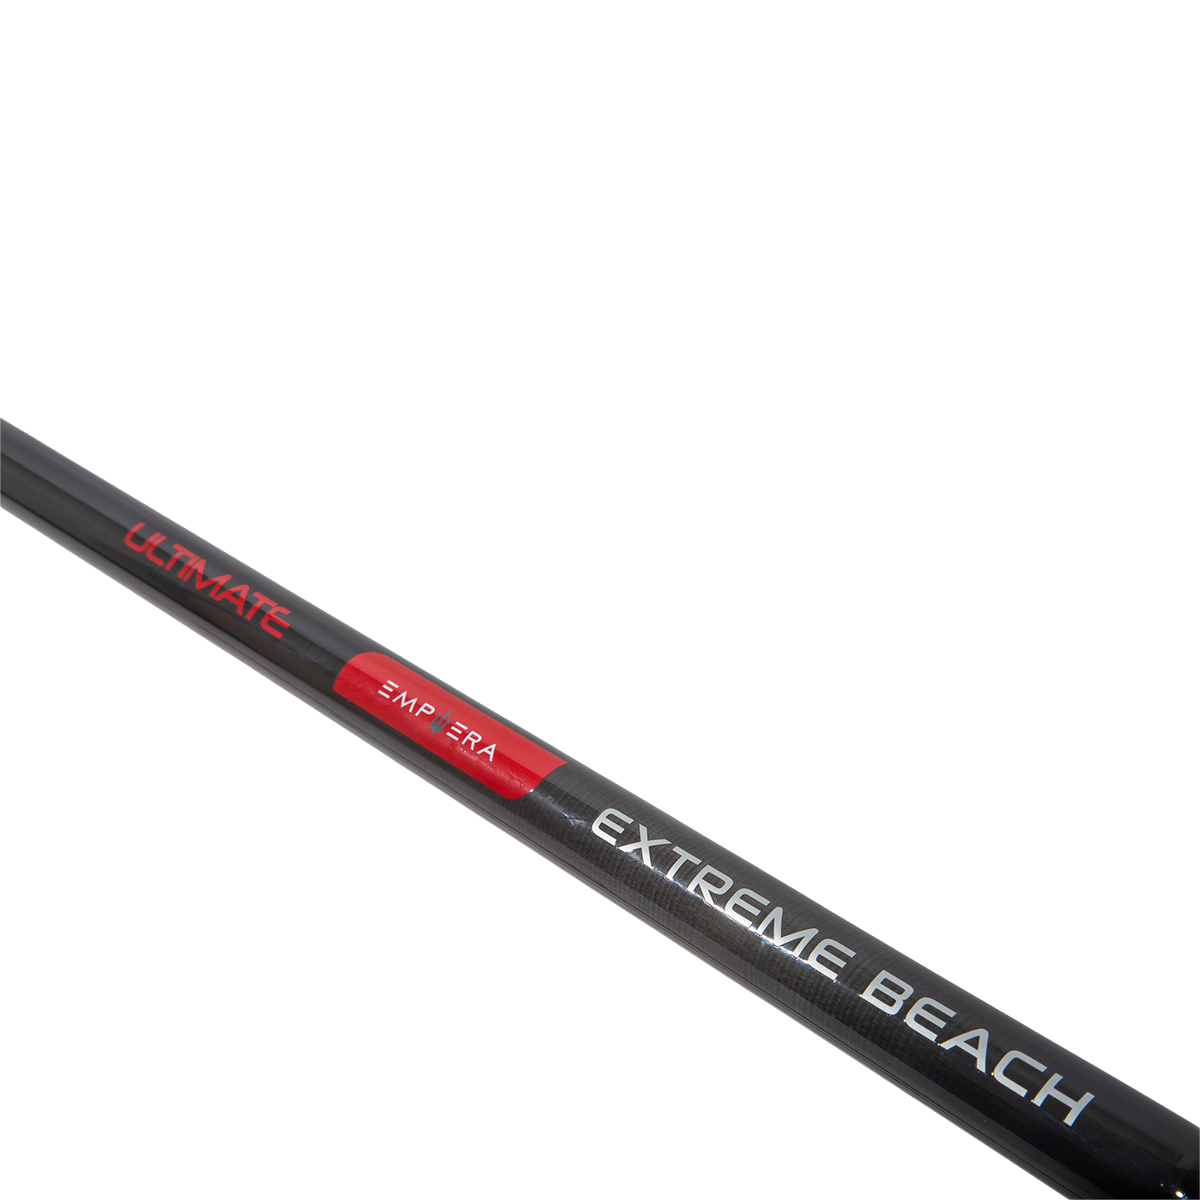 Ultimate Empera Extreme Beach Casting Rod